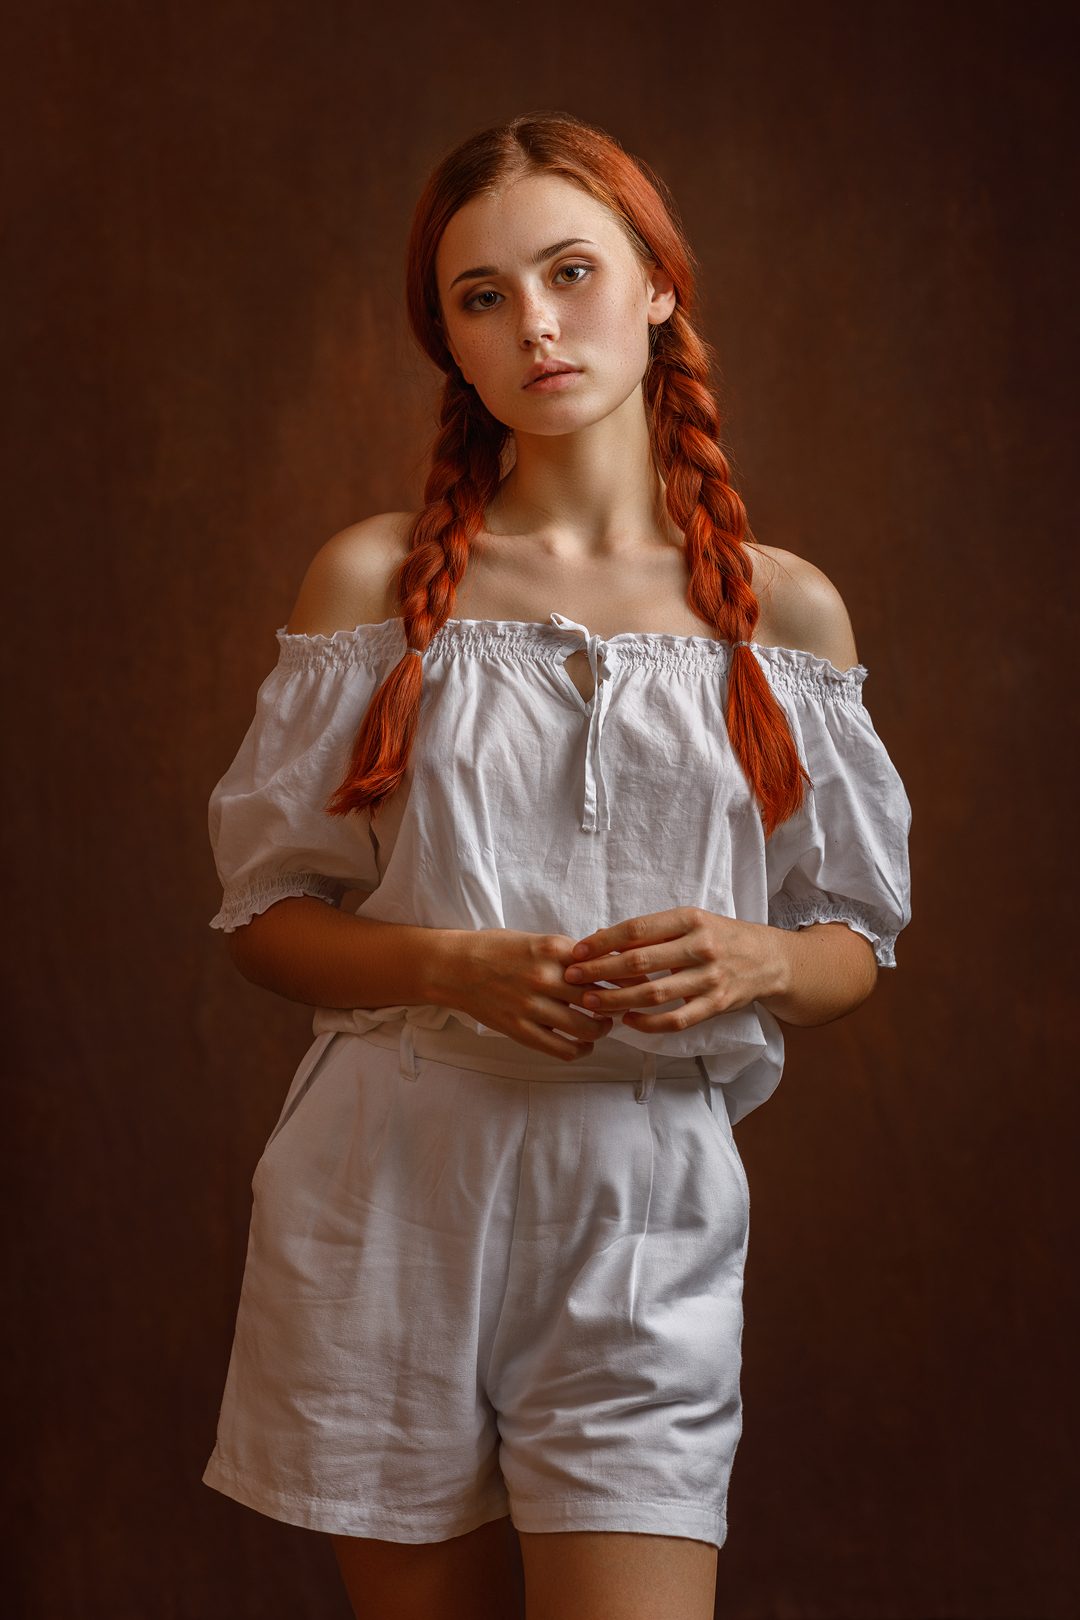 Sergey Sergeev Women Braids White Clothing Simple Background Freckles Twintails Redhead 1080x1620